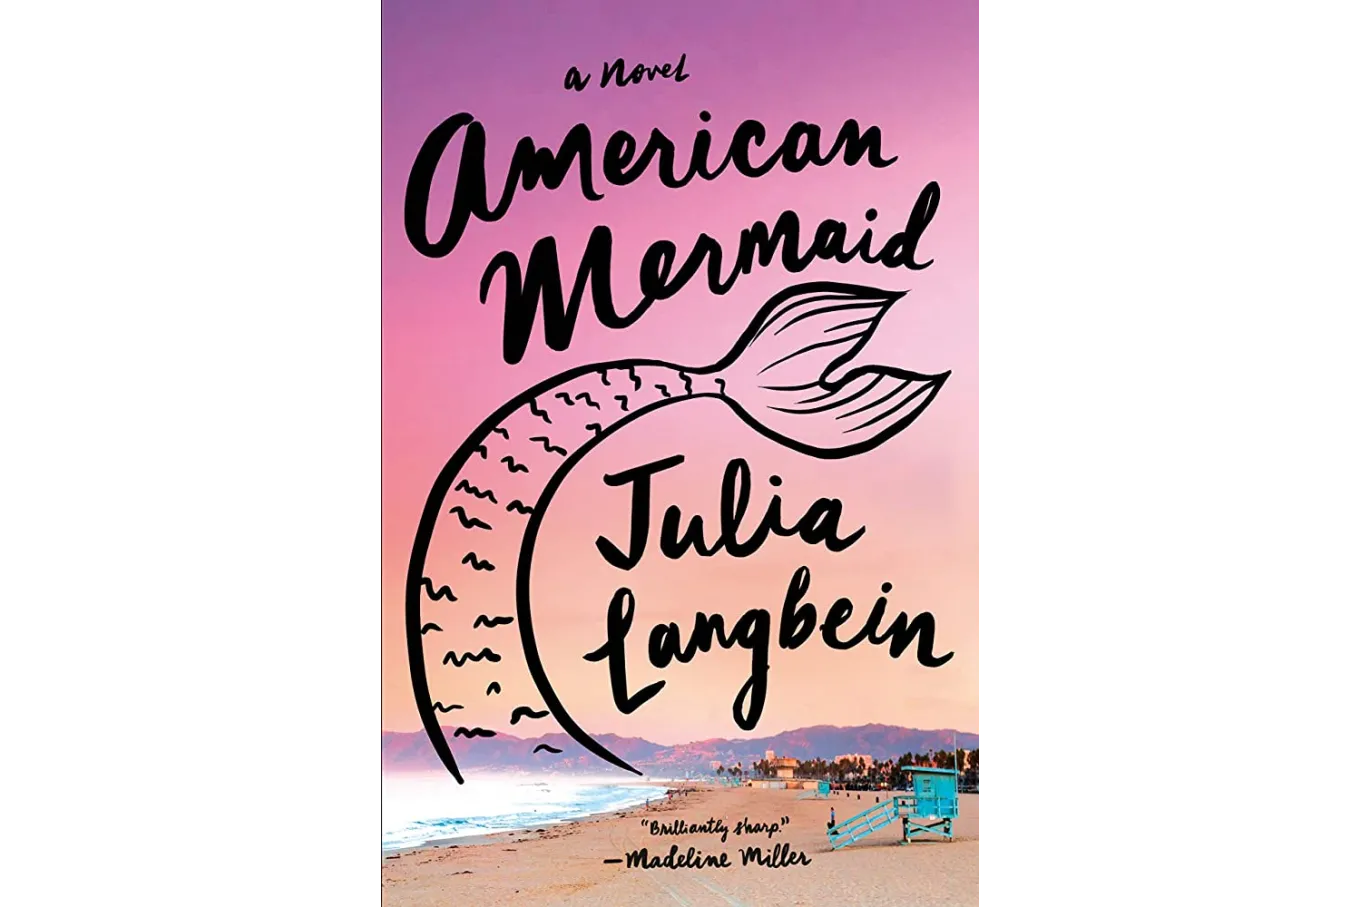 cover of novel American Mermaid. An black outline of a mermaid's tale is set on a beach background, with shades of pink and purple